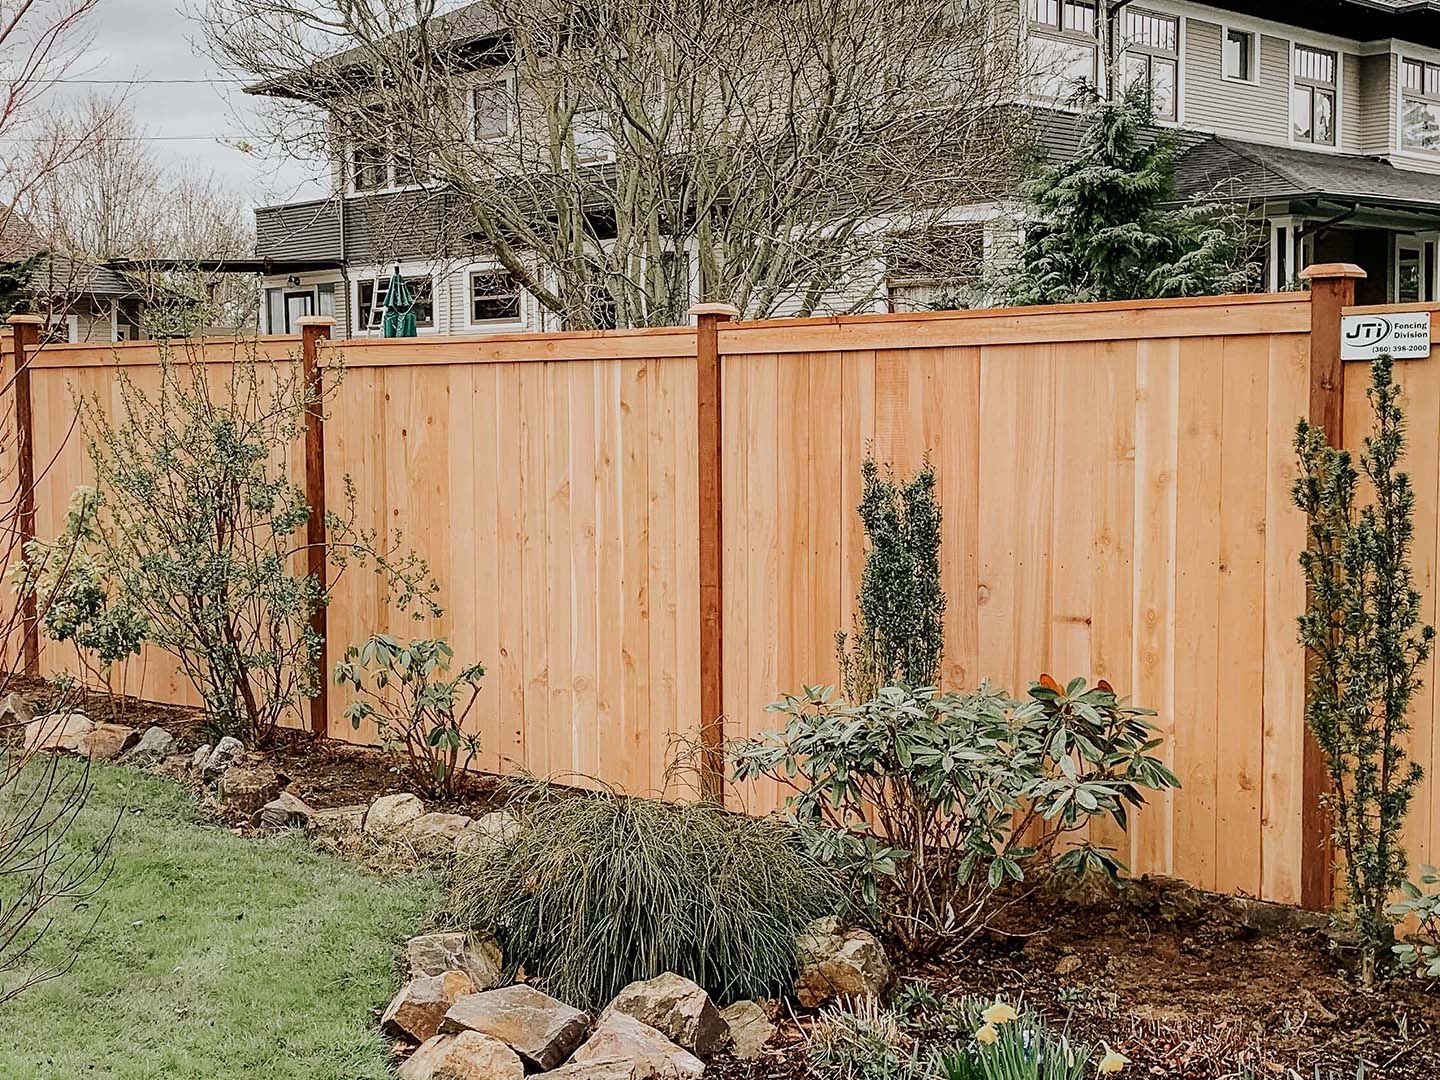 Photo of a Lynden WA wood fence